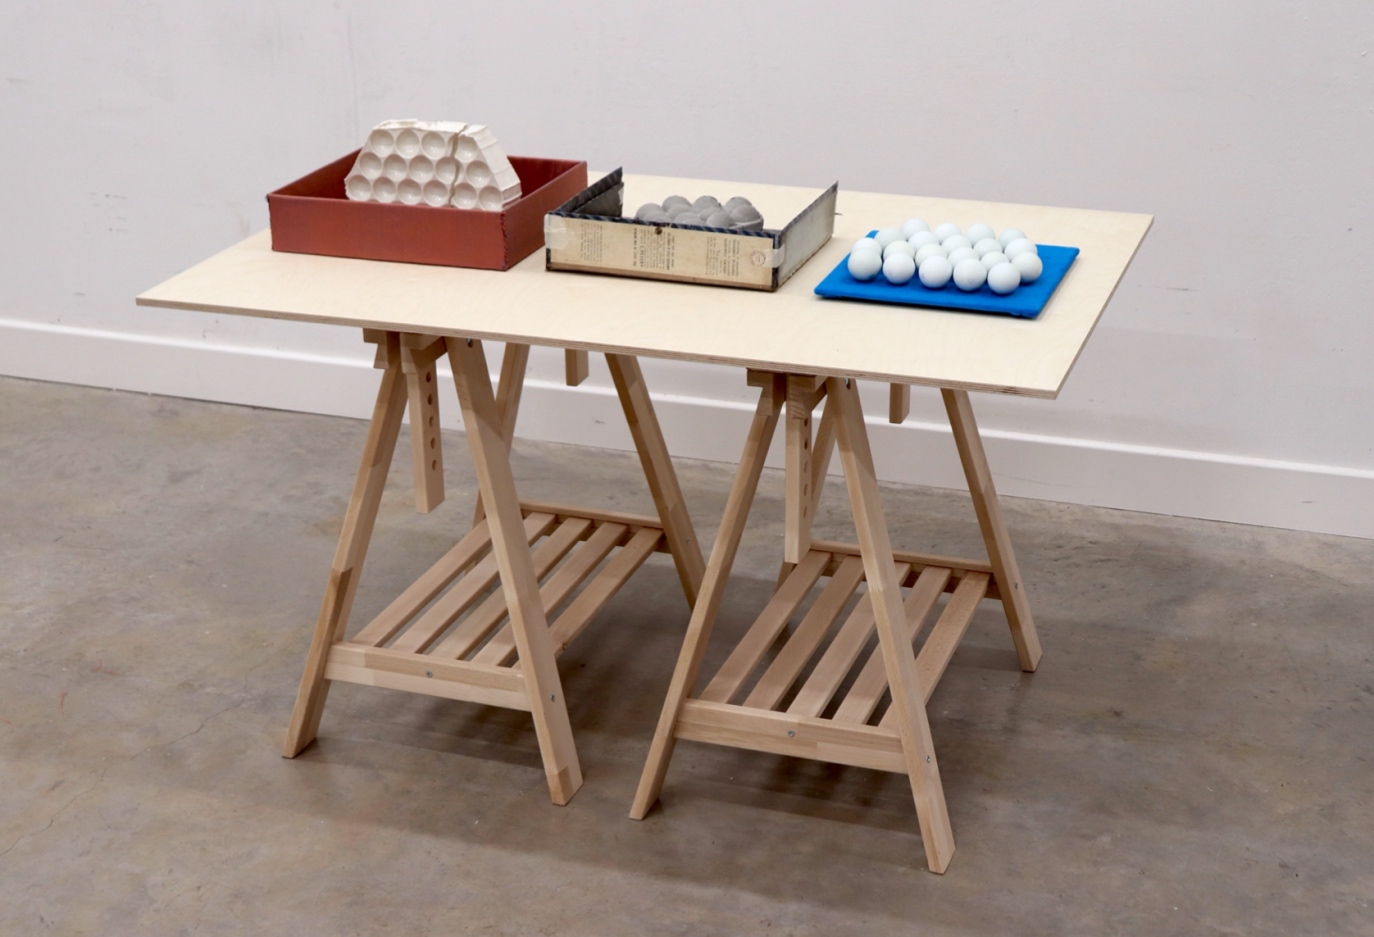 A table with three boxes on. Each box contains an iteration of an Estonian egg bag. 